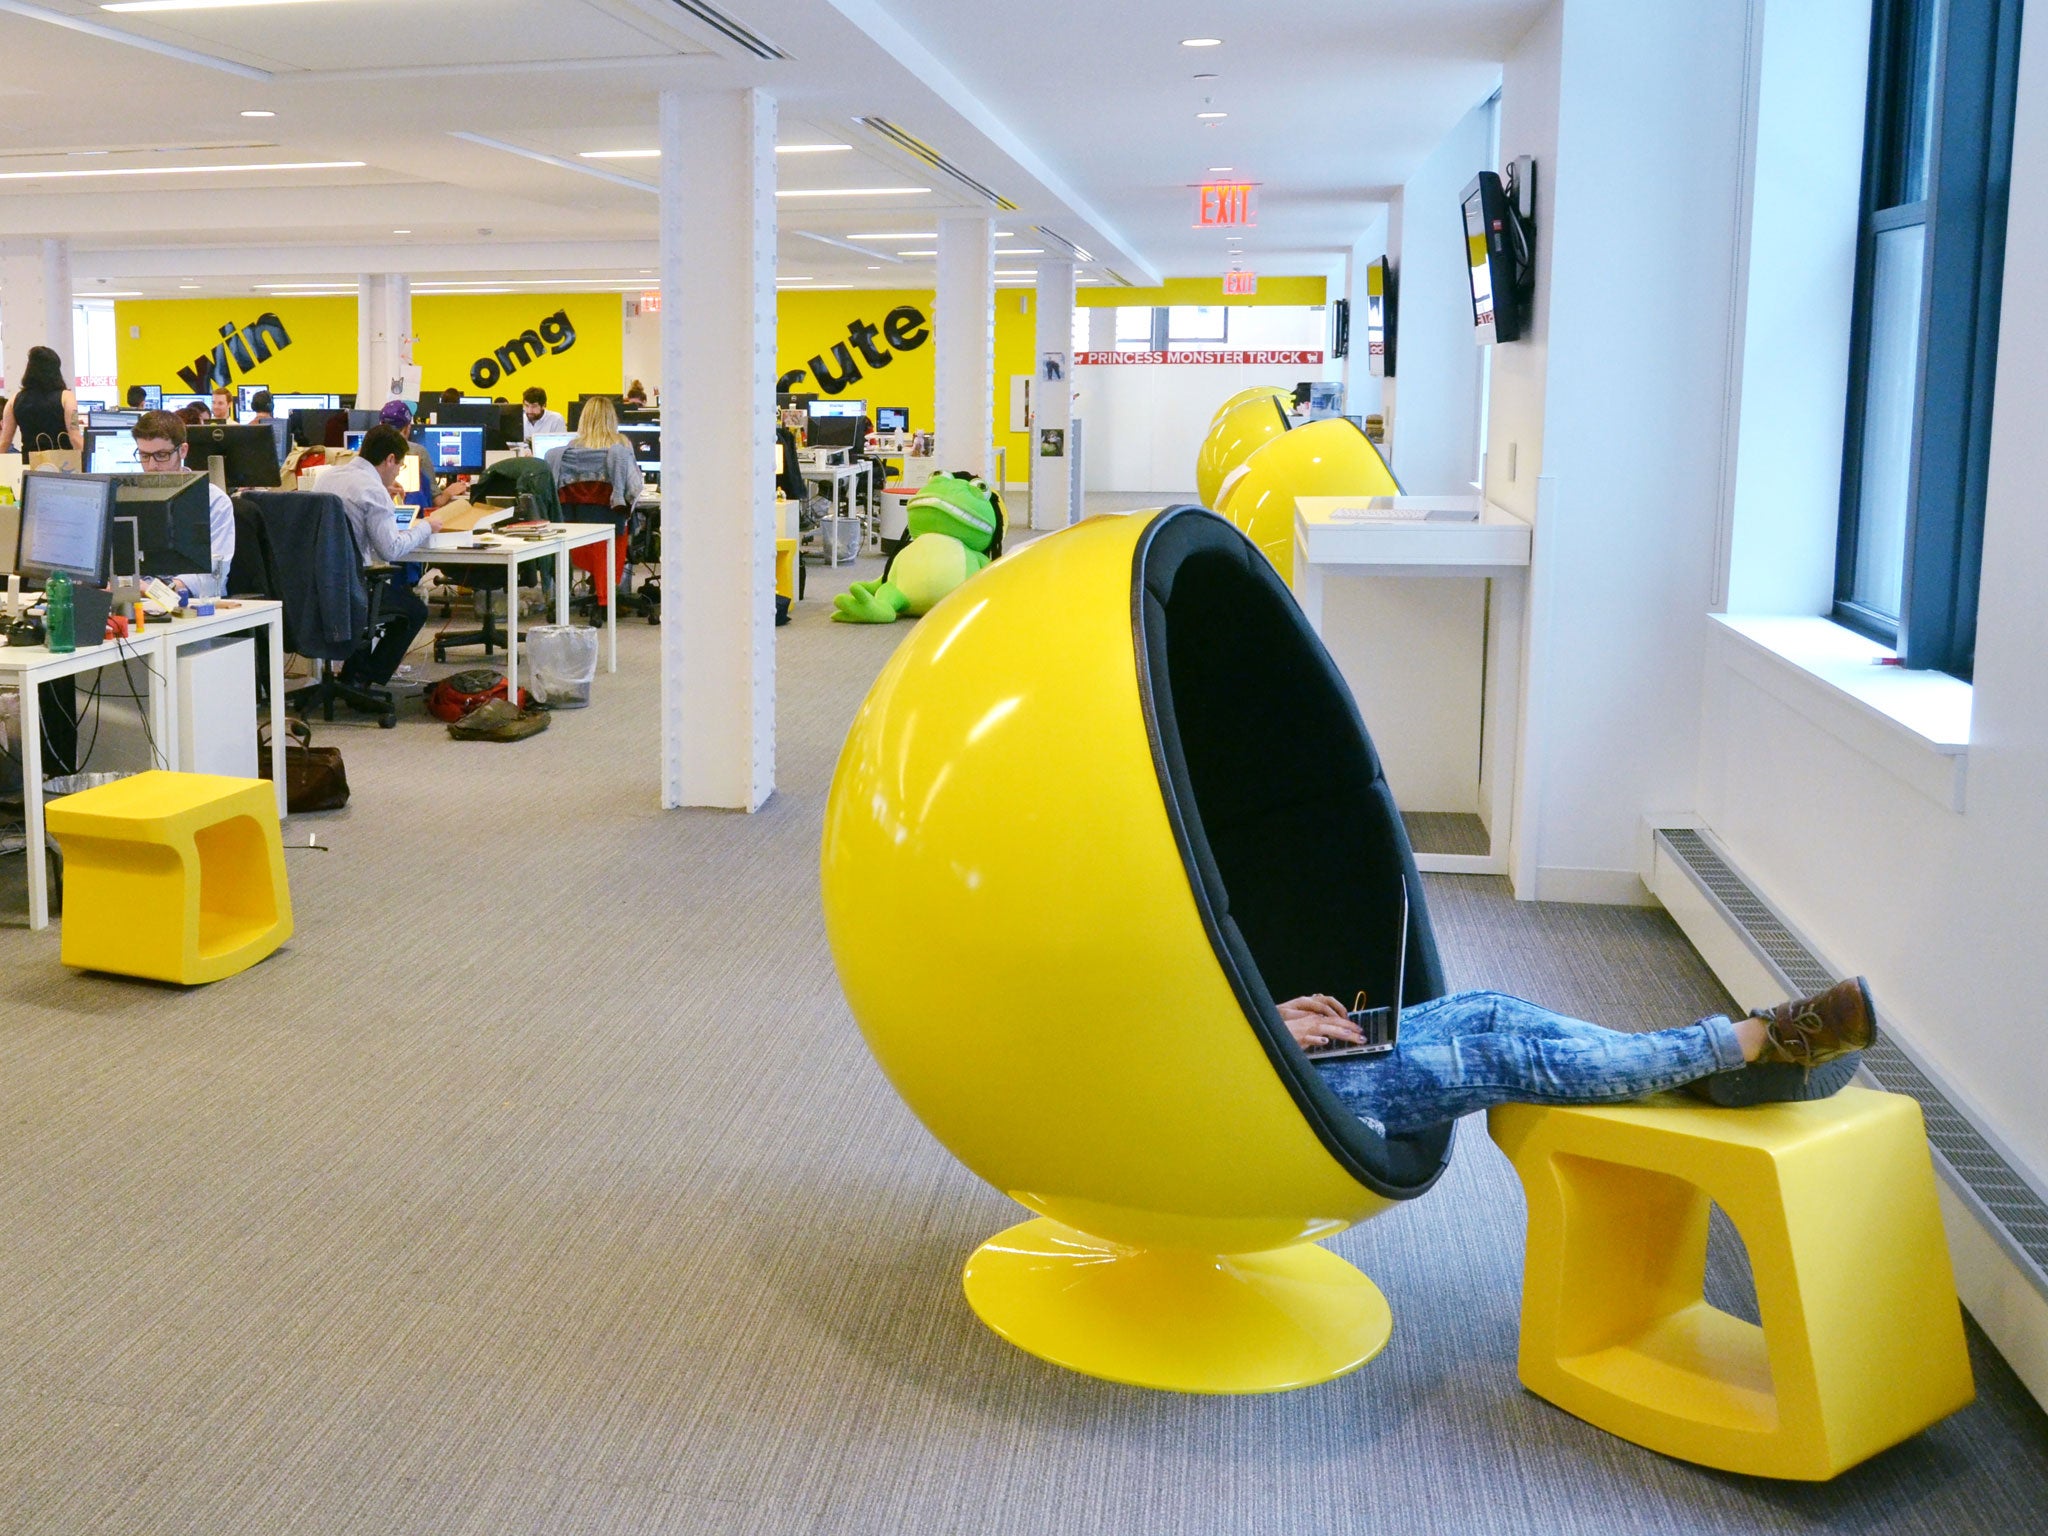 The growing reputation of BuzzFeed’s reporting teams, with the New York office pictured, has helped it to hire top investigative talent